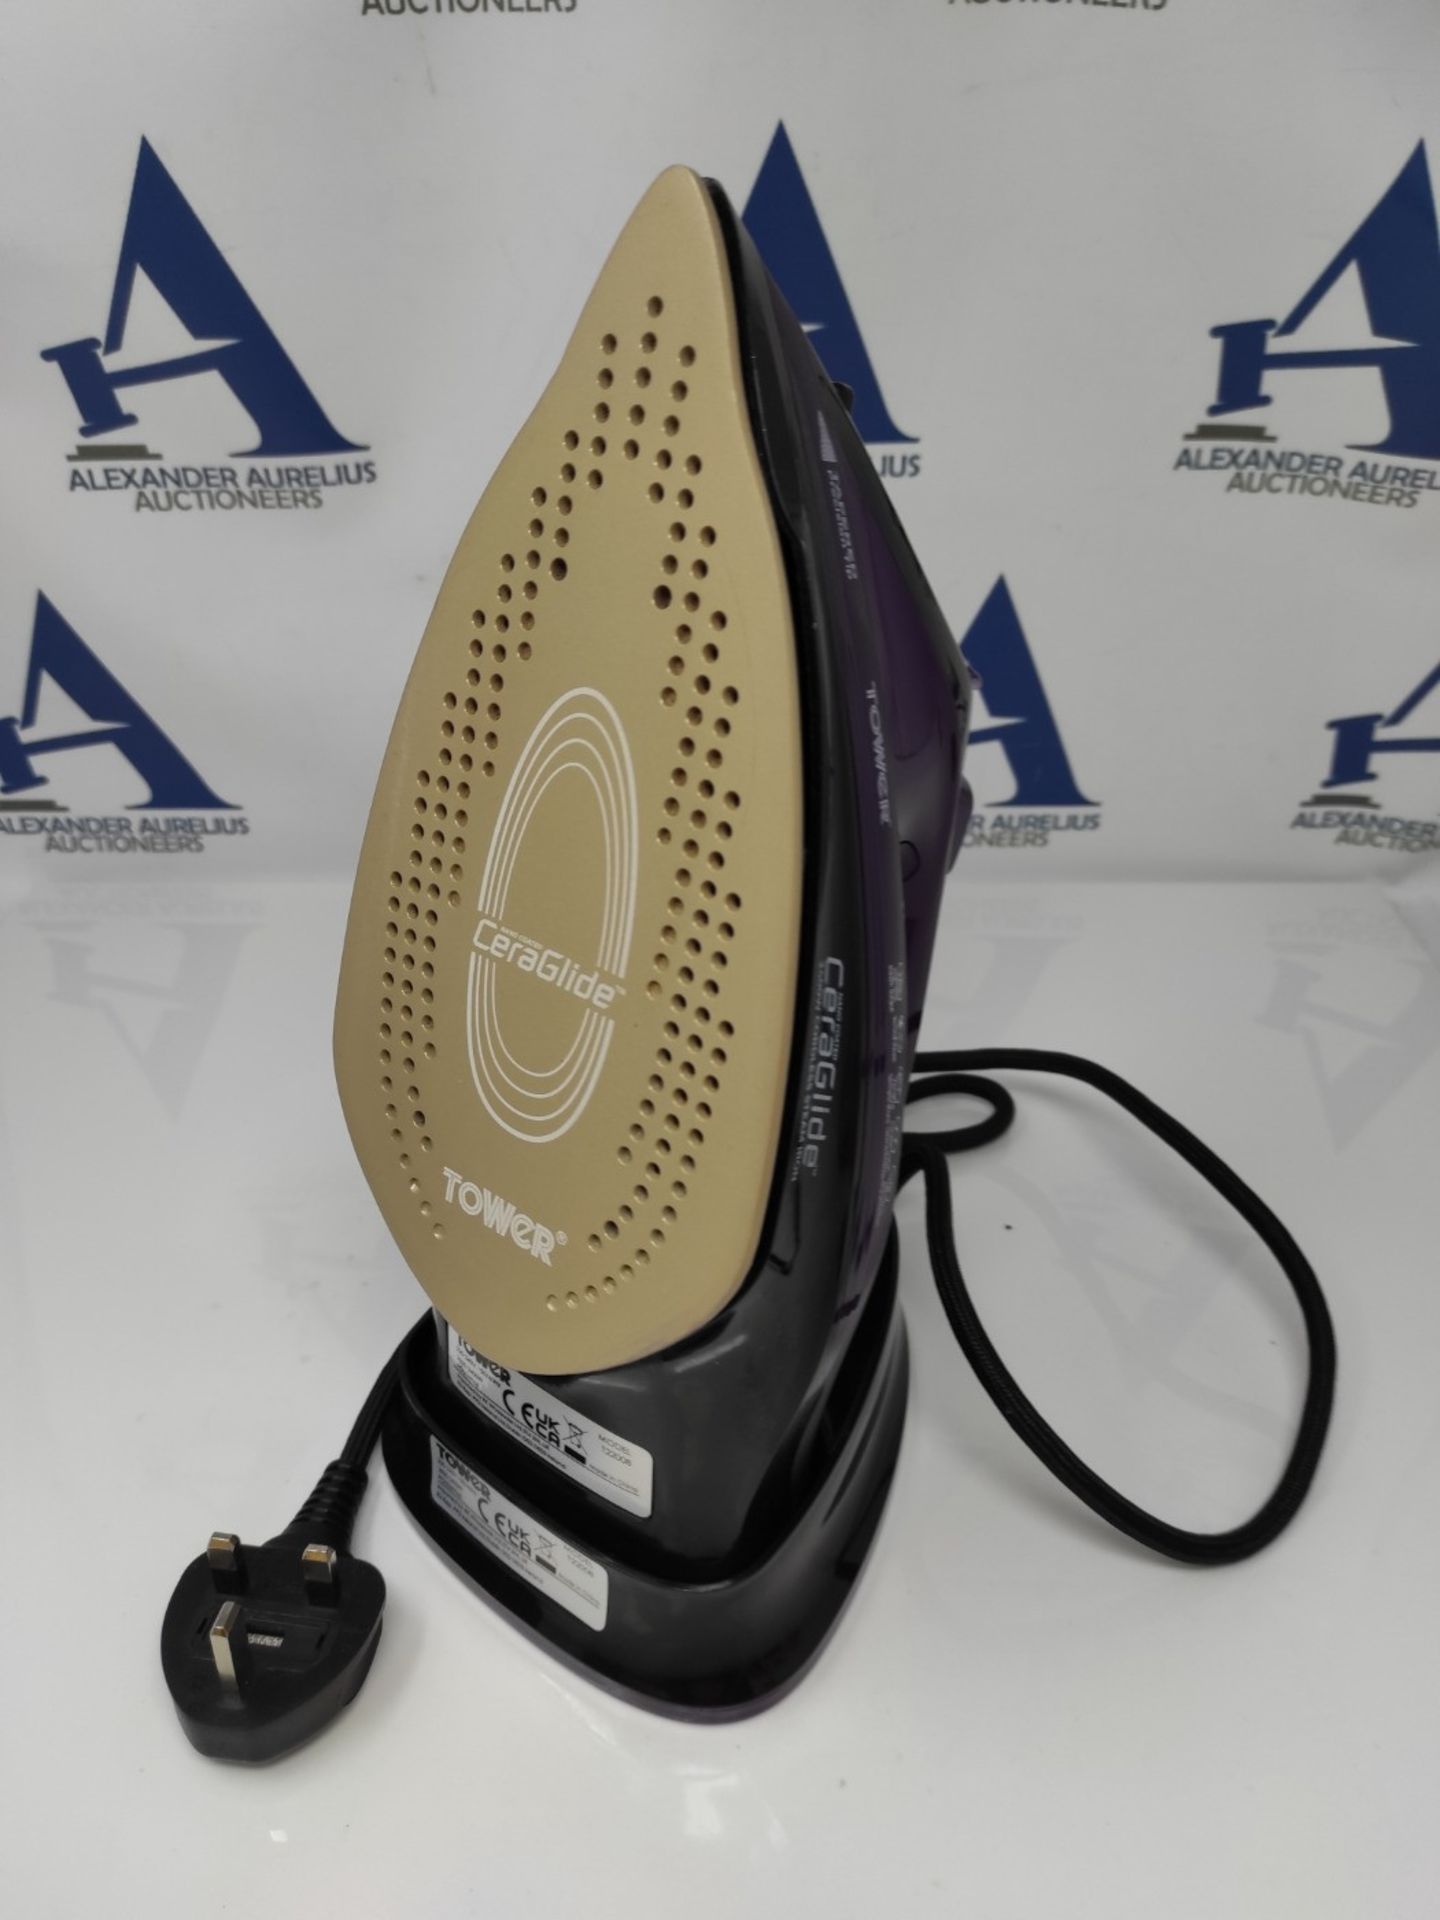 Tower T22008 CeraGlide Cordless Steam Iron with Ceramic Soleplate and Variable Steam F - Image 2 of 2